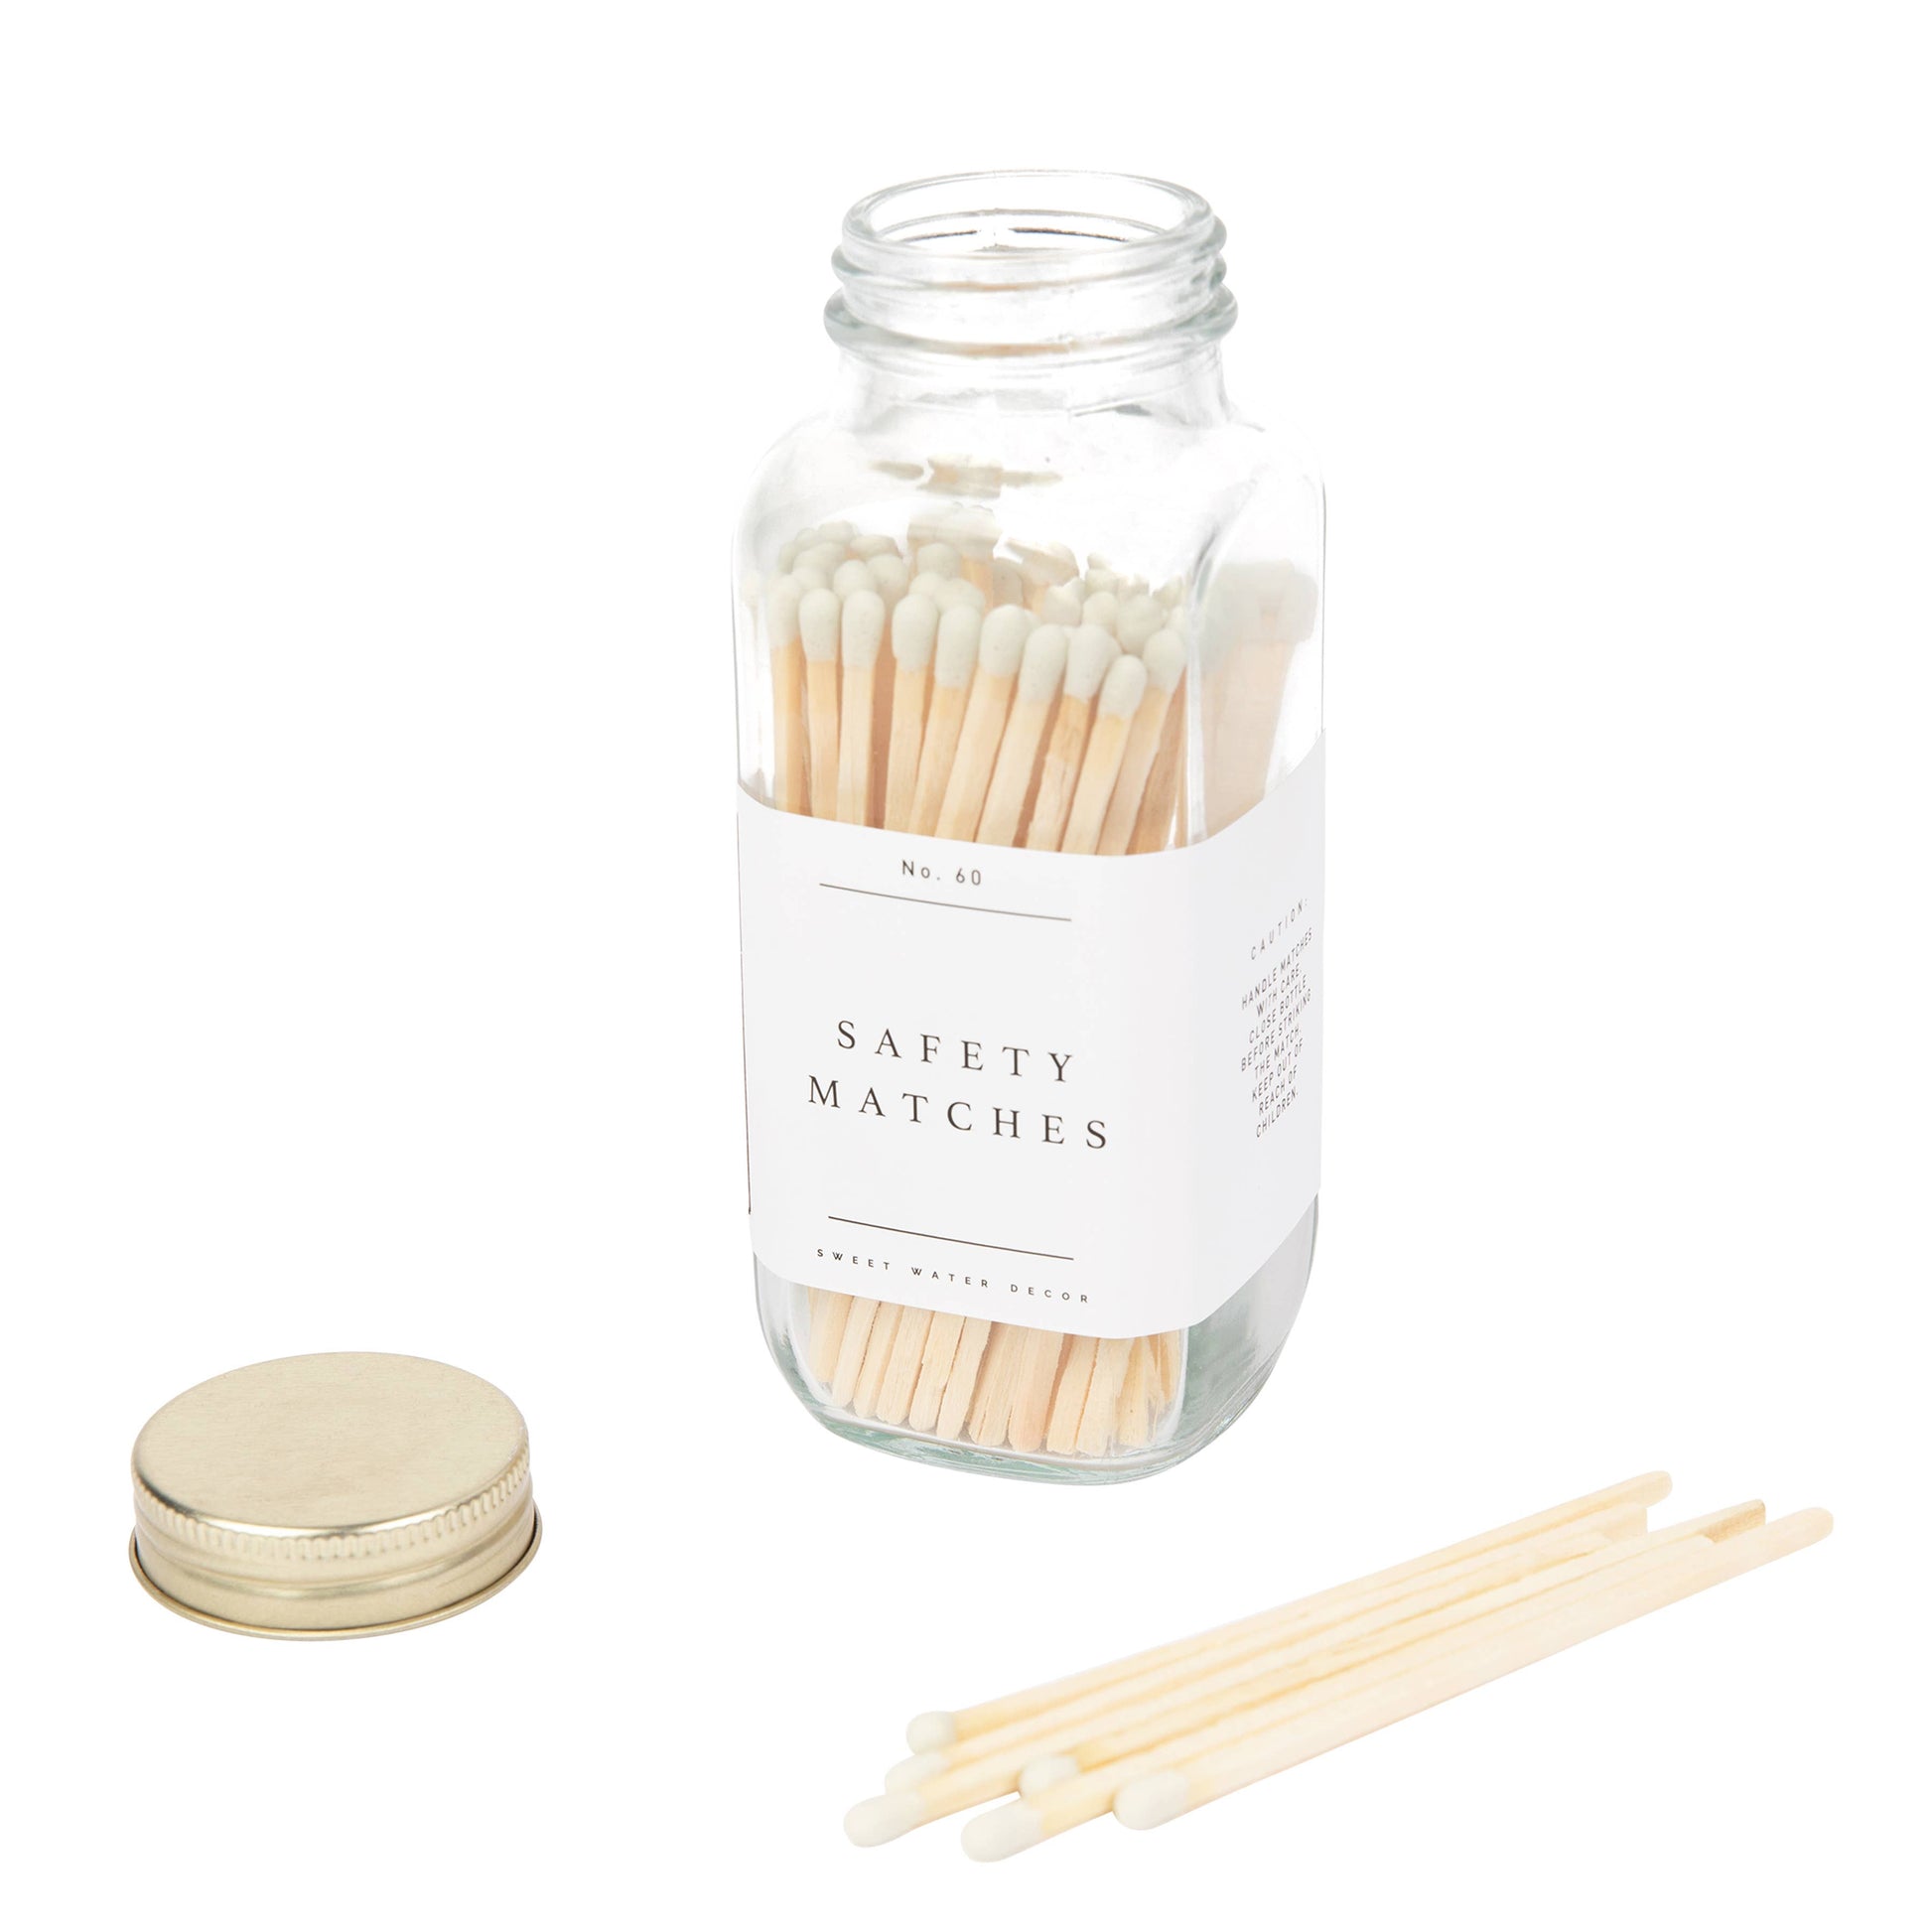 Safety Matches, White Tip - Home Decor & Gifts-Sweet Water Decor--The Twisted Chandelier